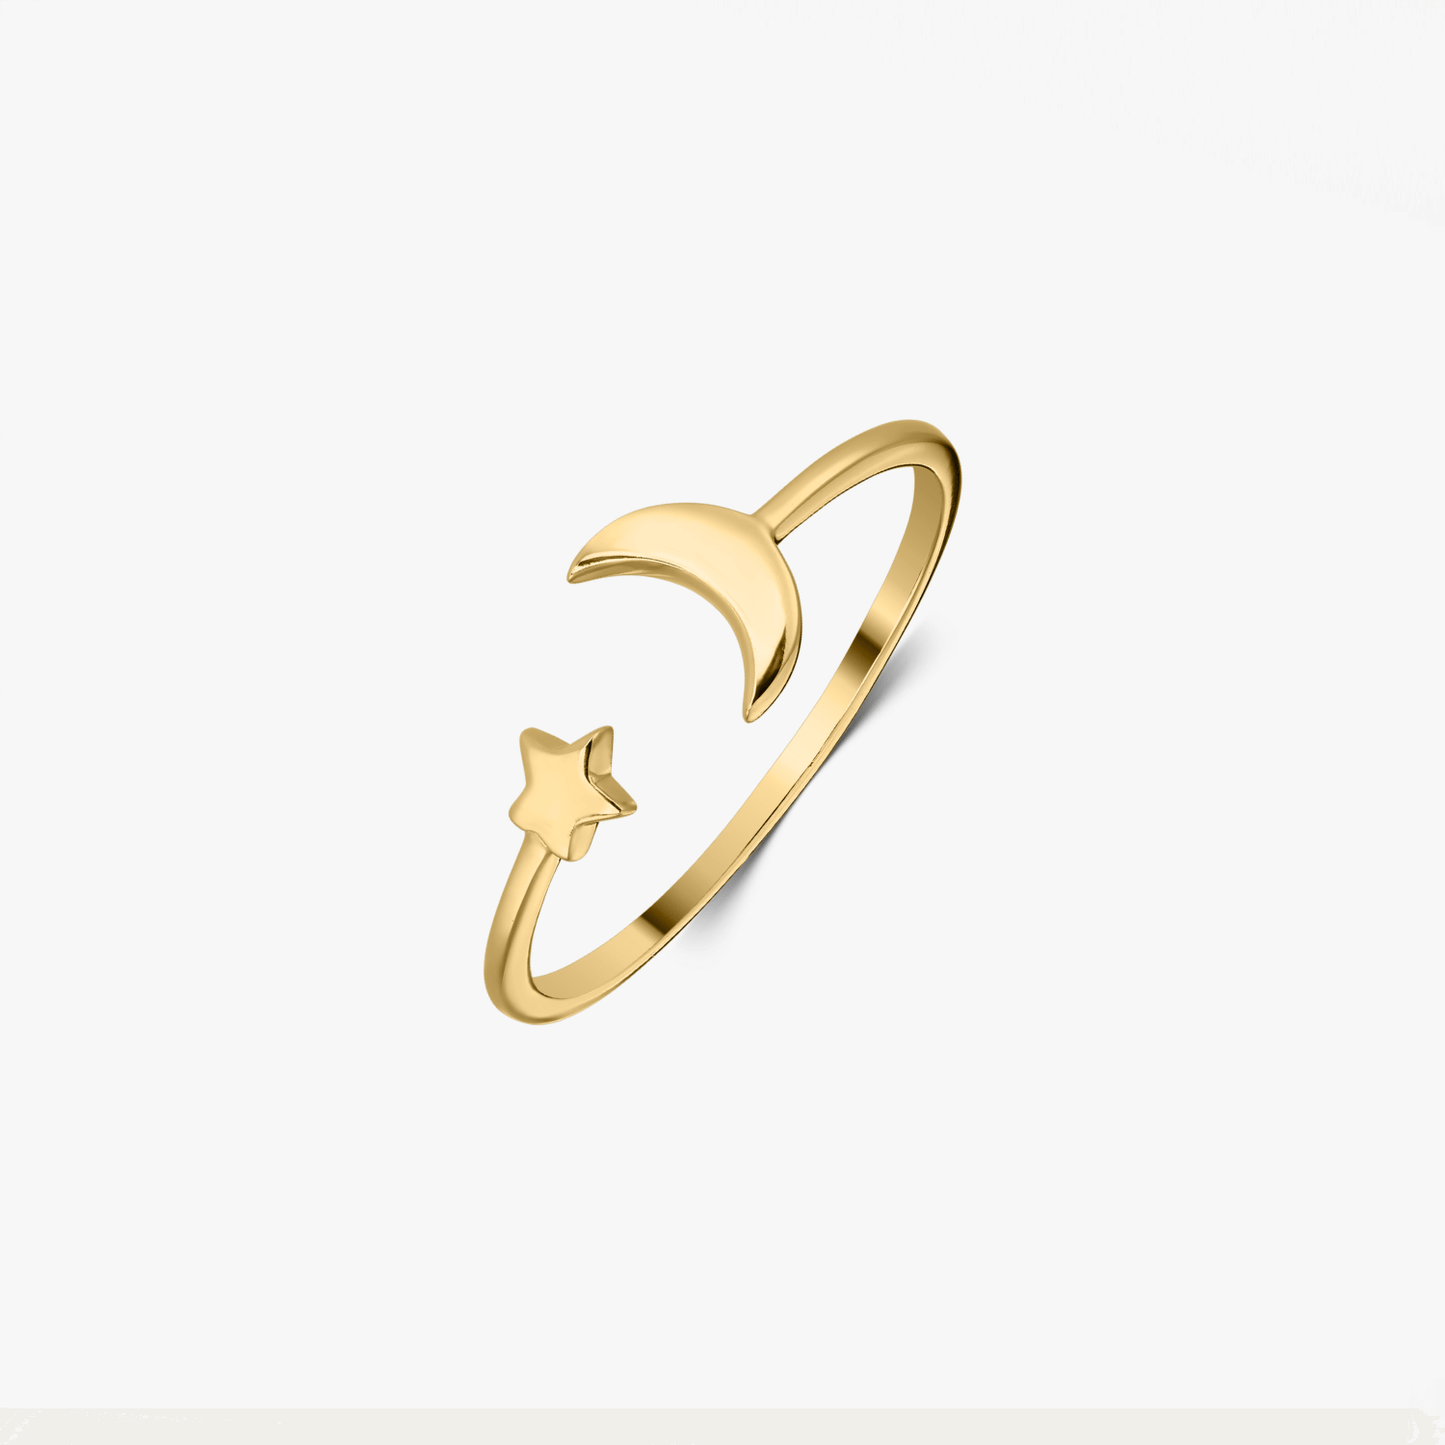 Gold Starry Night silver ring